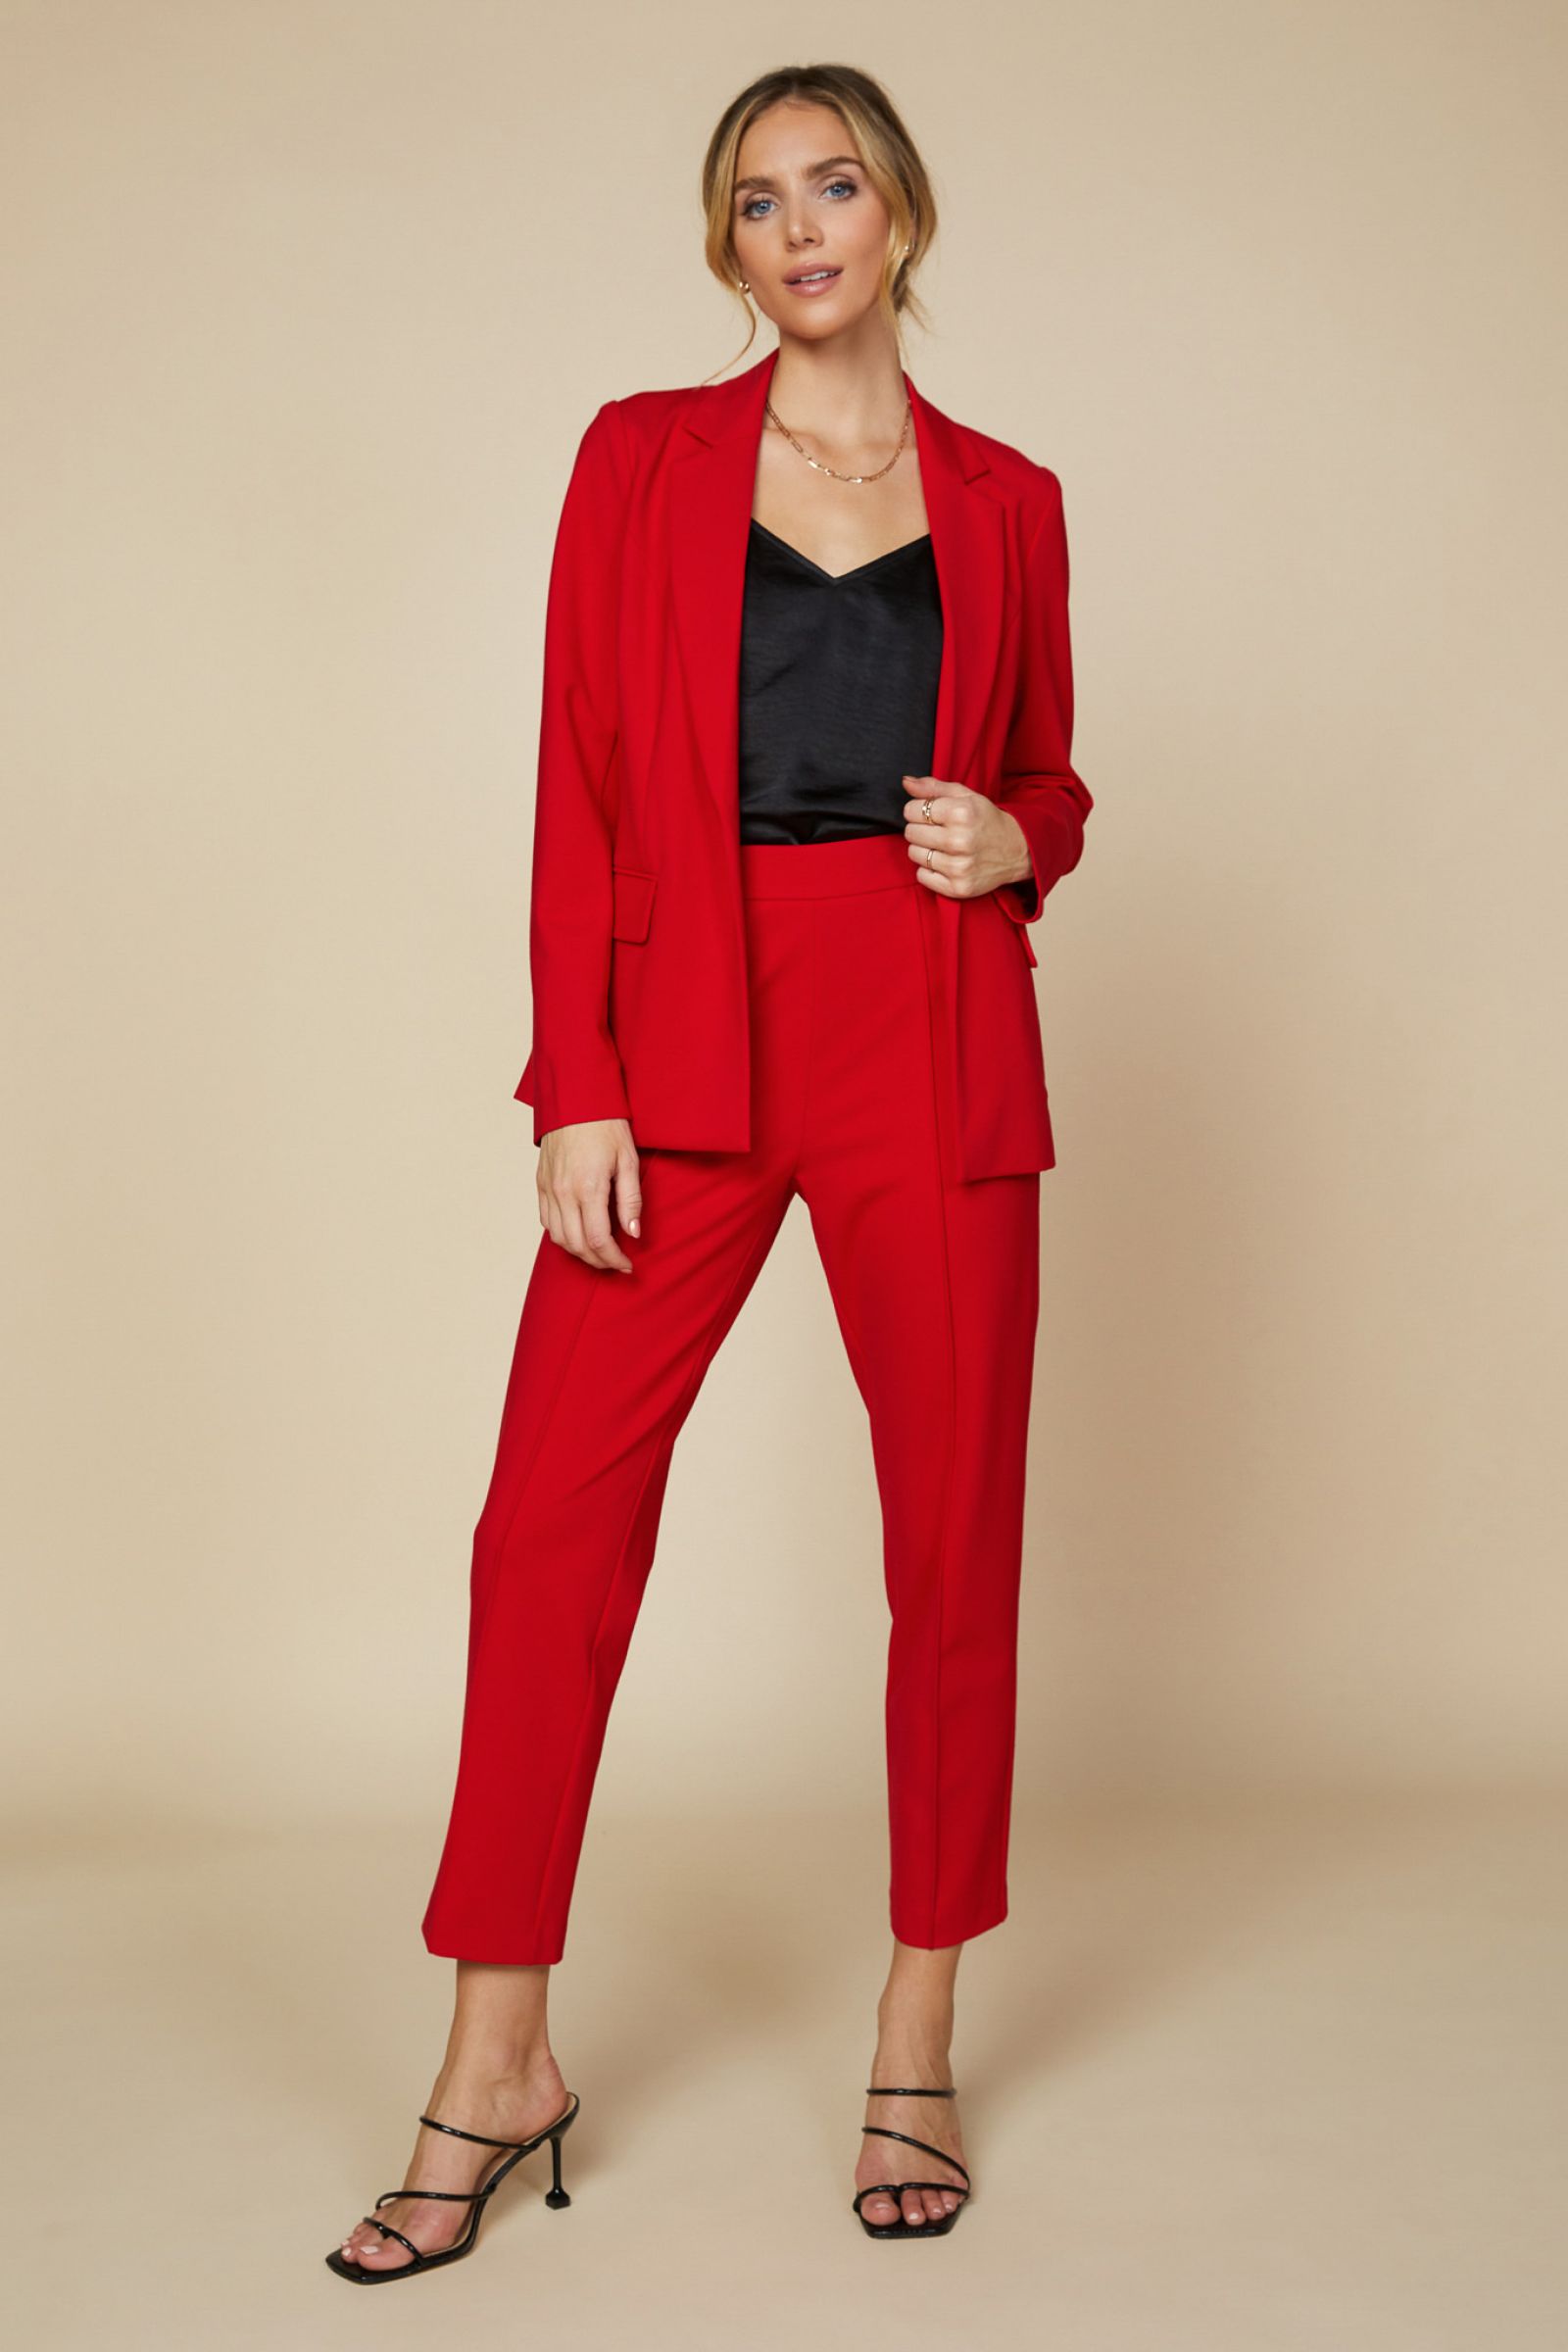 Knit Red Pintuck Pull Up Trouser Pants in Scarlet Red is Stretch and the perfect way to suit up in a comfortable way. 5% Spandex and elastic waist back adds some stretch to compliment your curves. Our red hot pants have side pockets and are a relaxed fit. 70% Rayon 25% Polyester 5% Spandex. Check out the jacket too. 